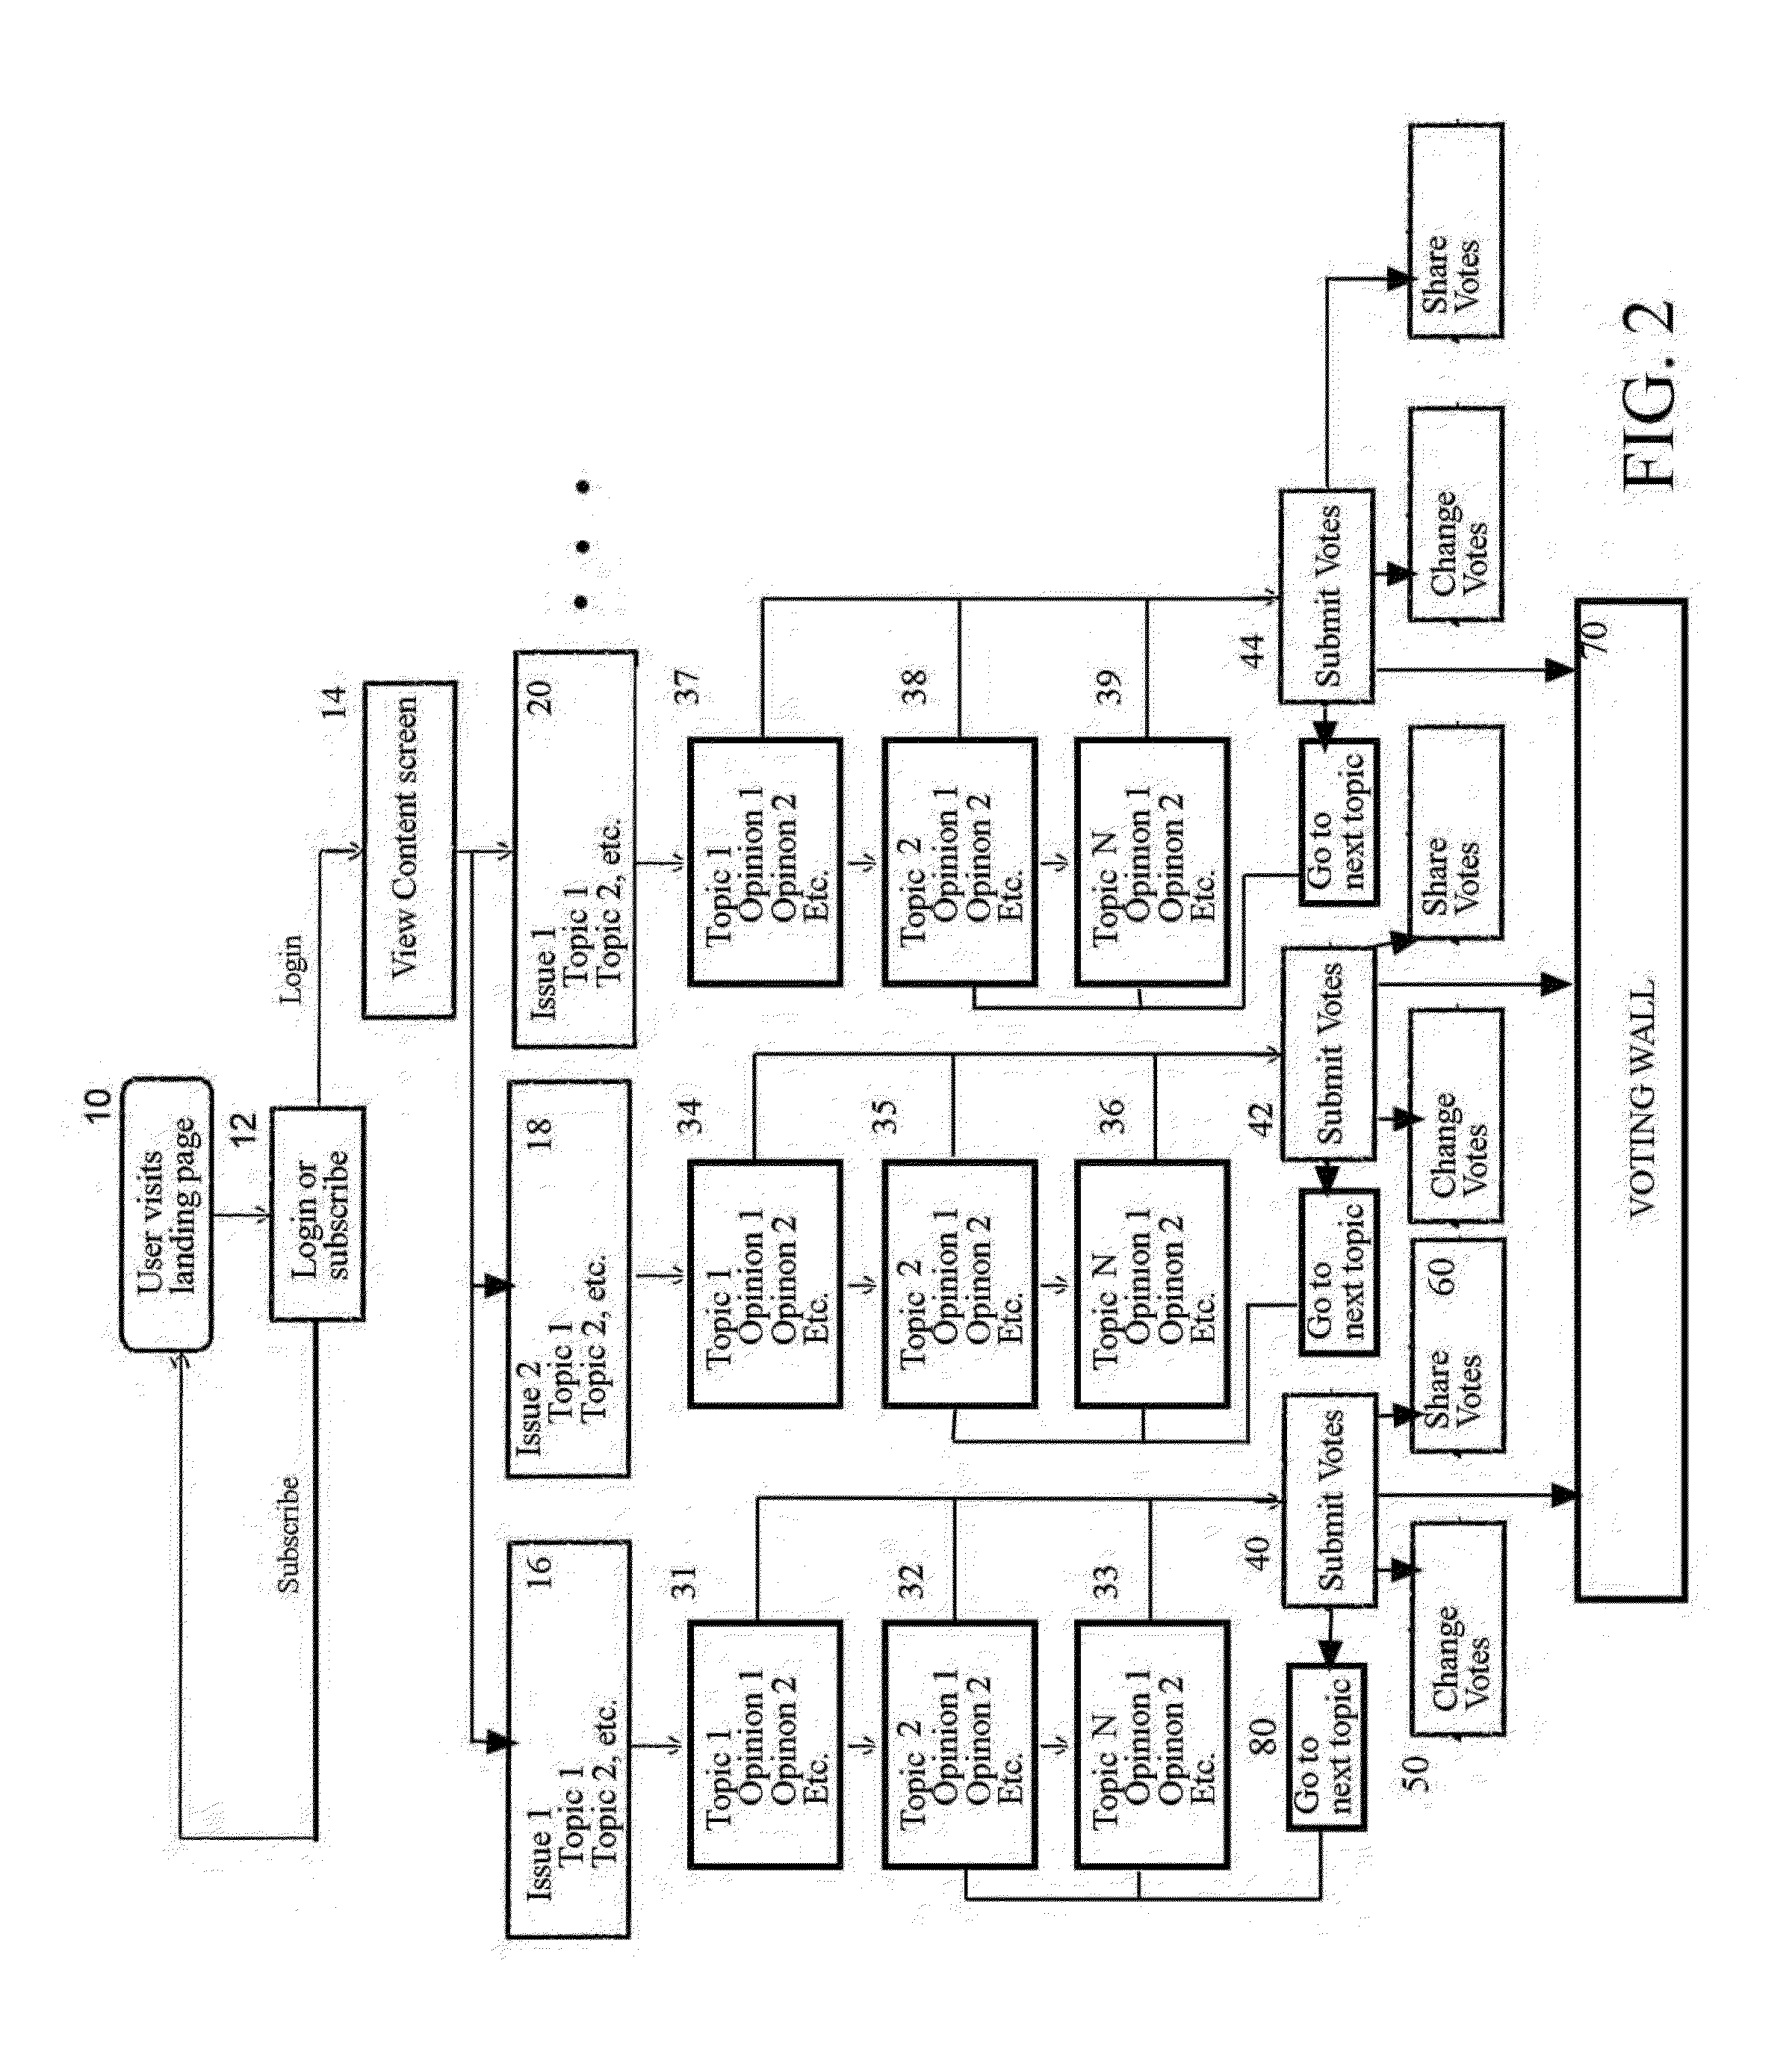 Integrated system and method for social opinion networking